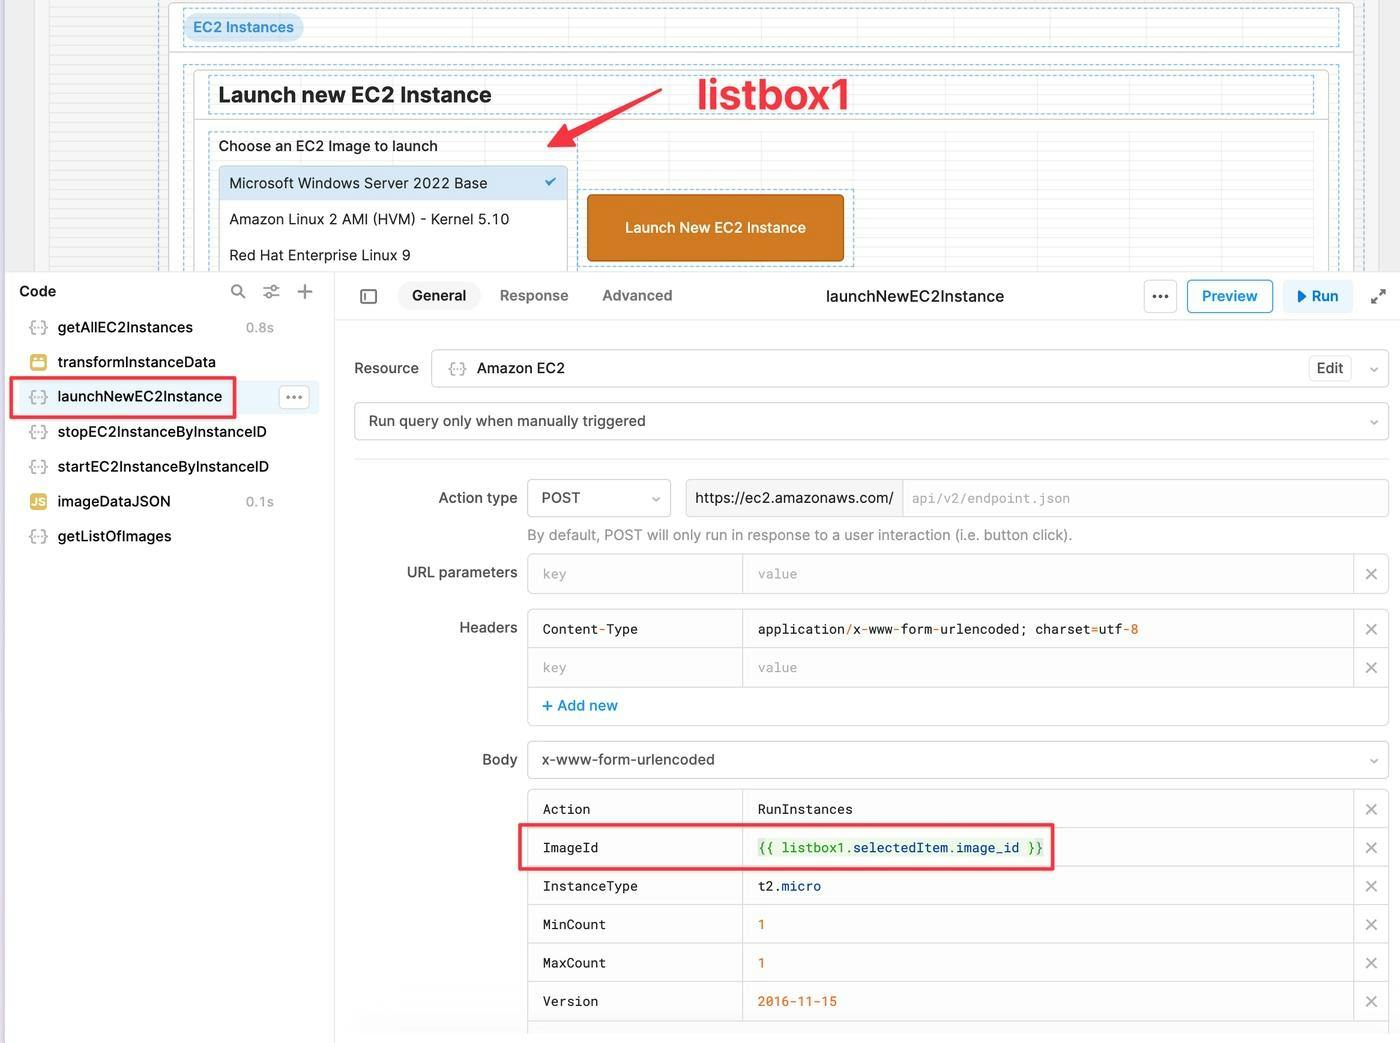 Reference the image selected in the Listbox to launch a new EC2 instance